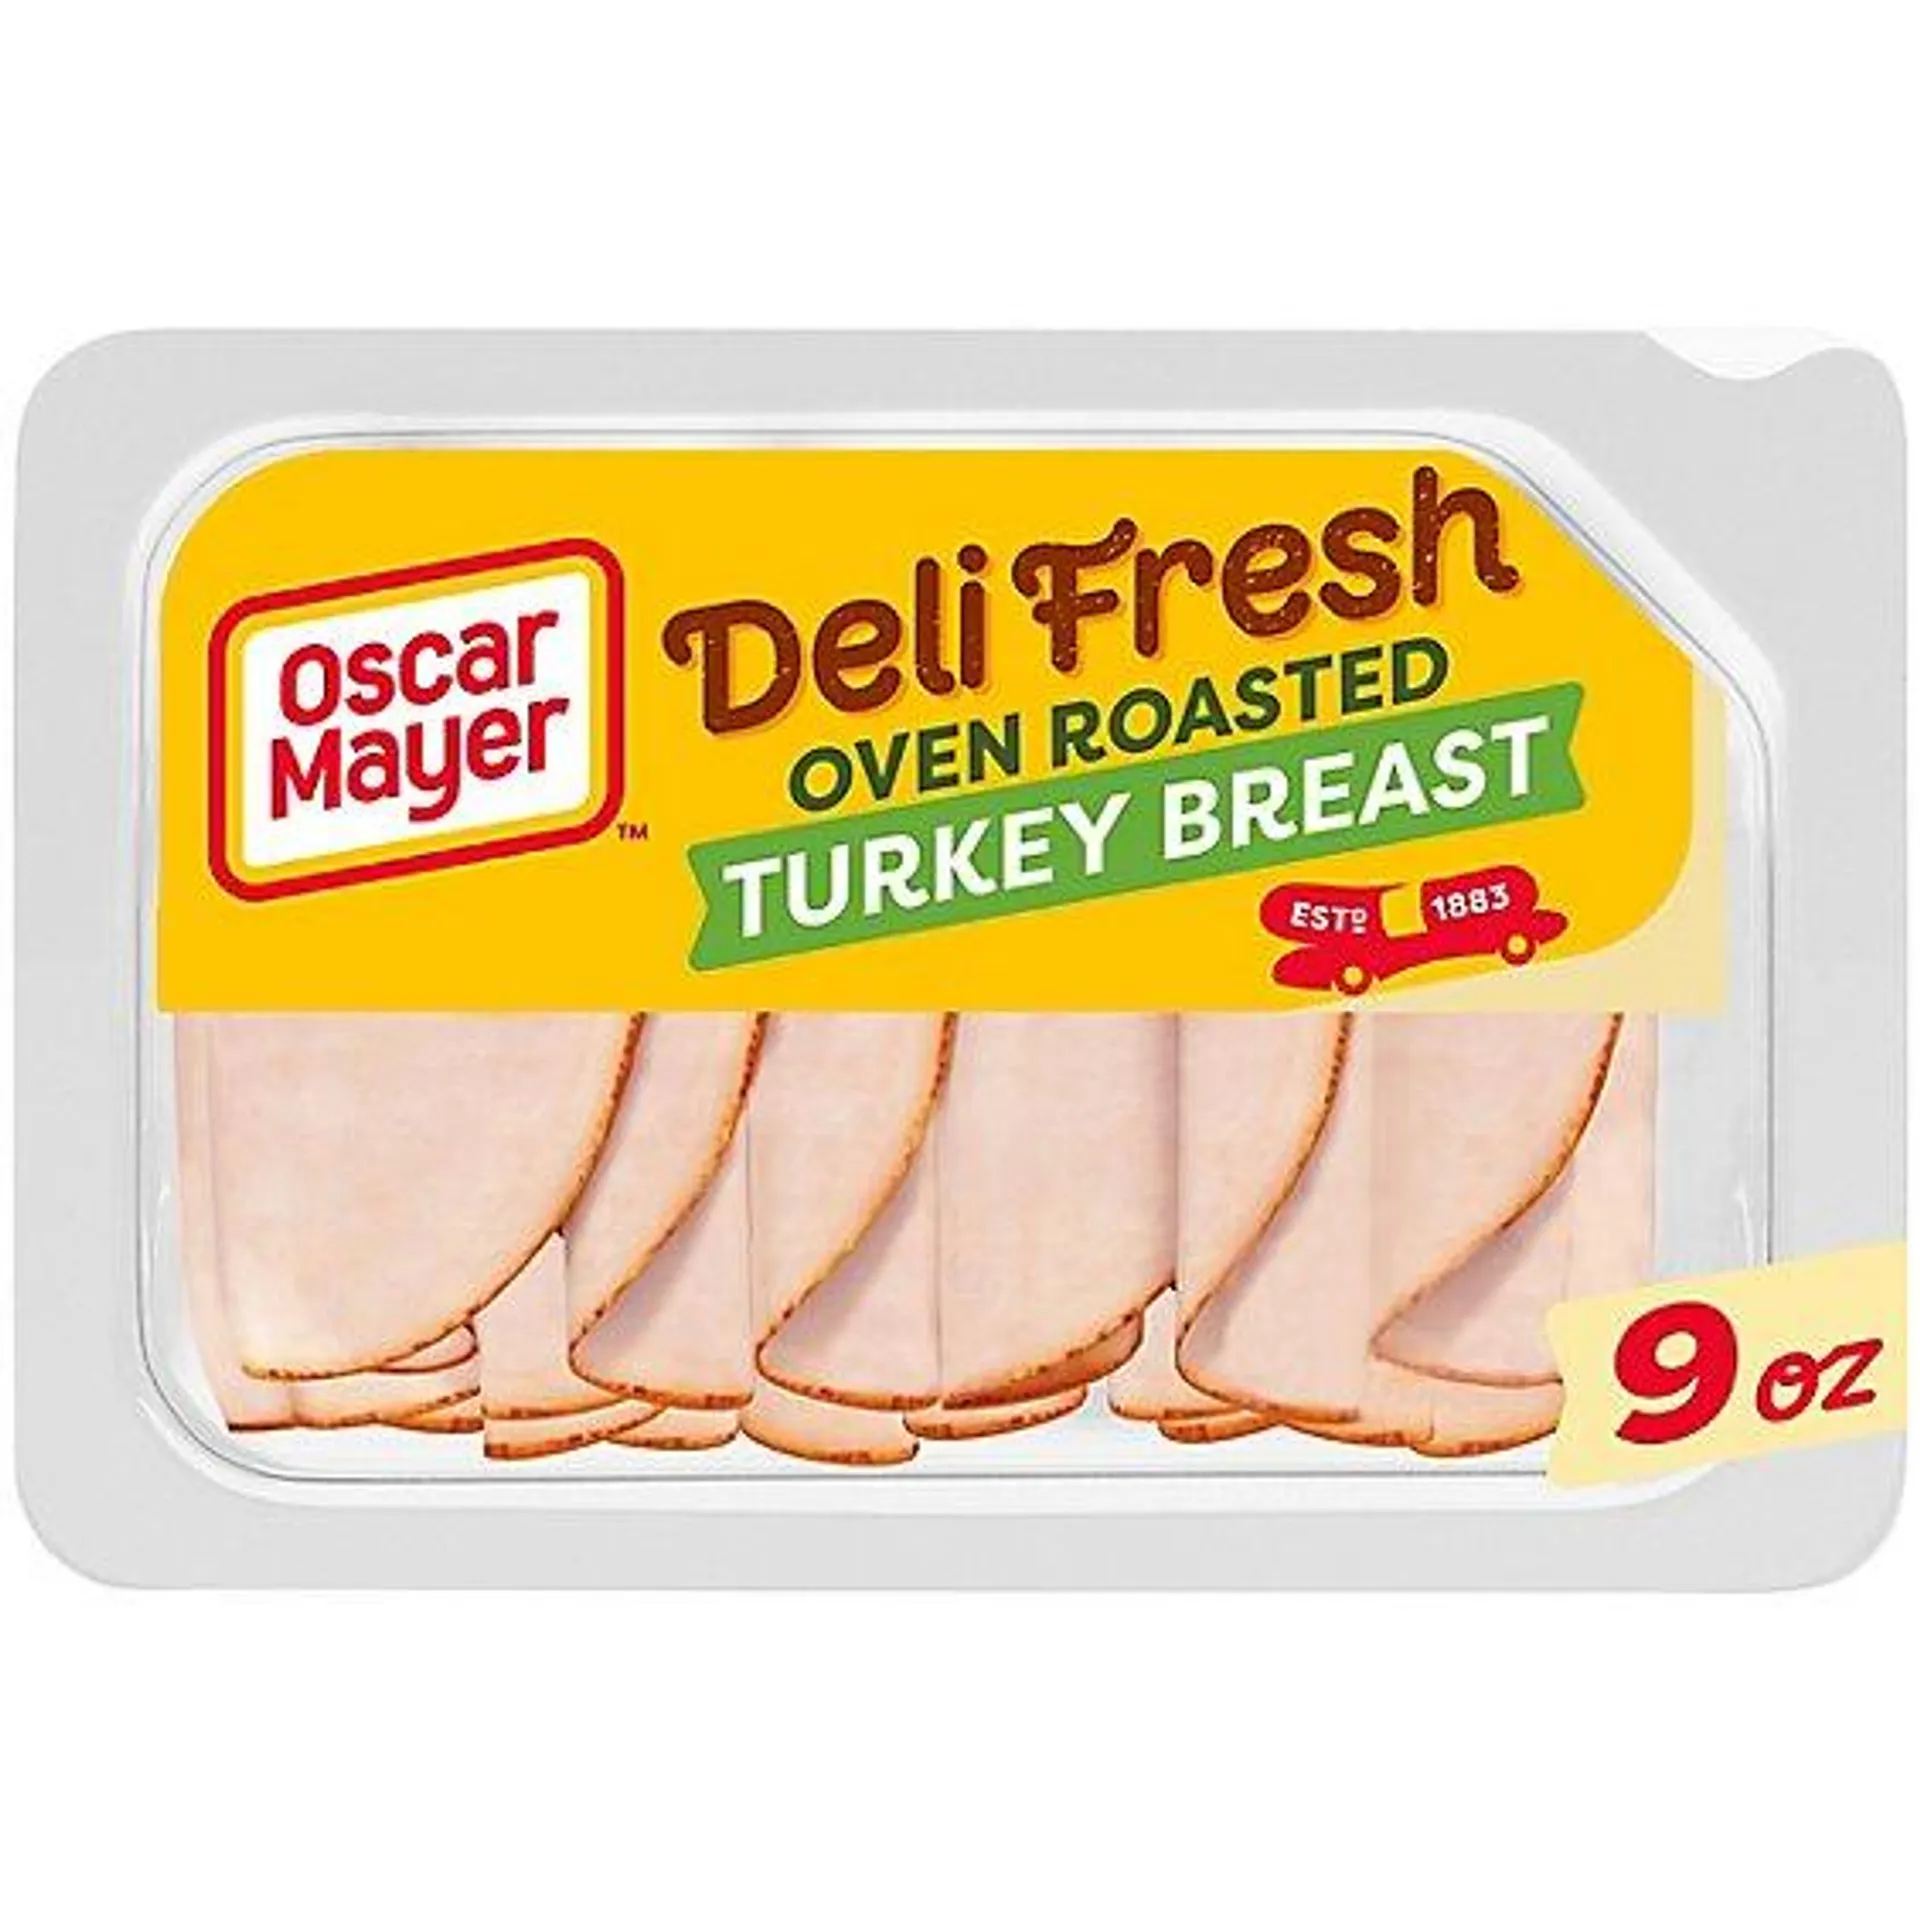 Oscar Mayer Deli Fresh Oven Roasted Turkey Breast for a Low Carb Lifestyle Tray - 9 Oz